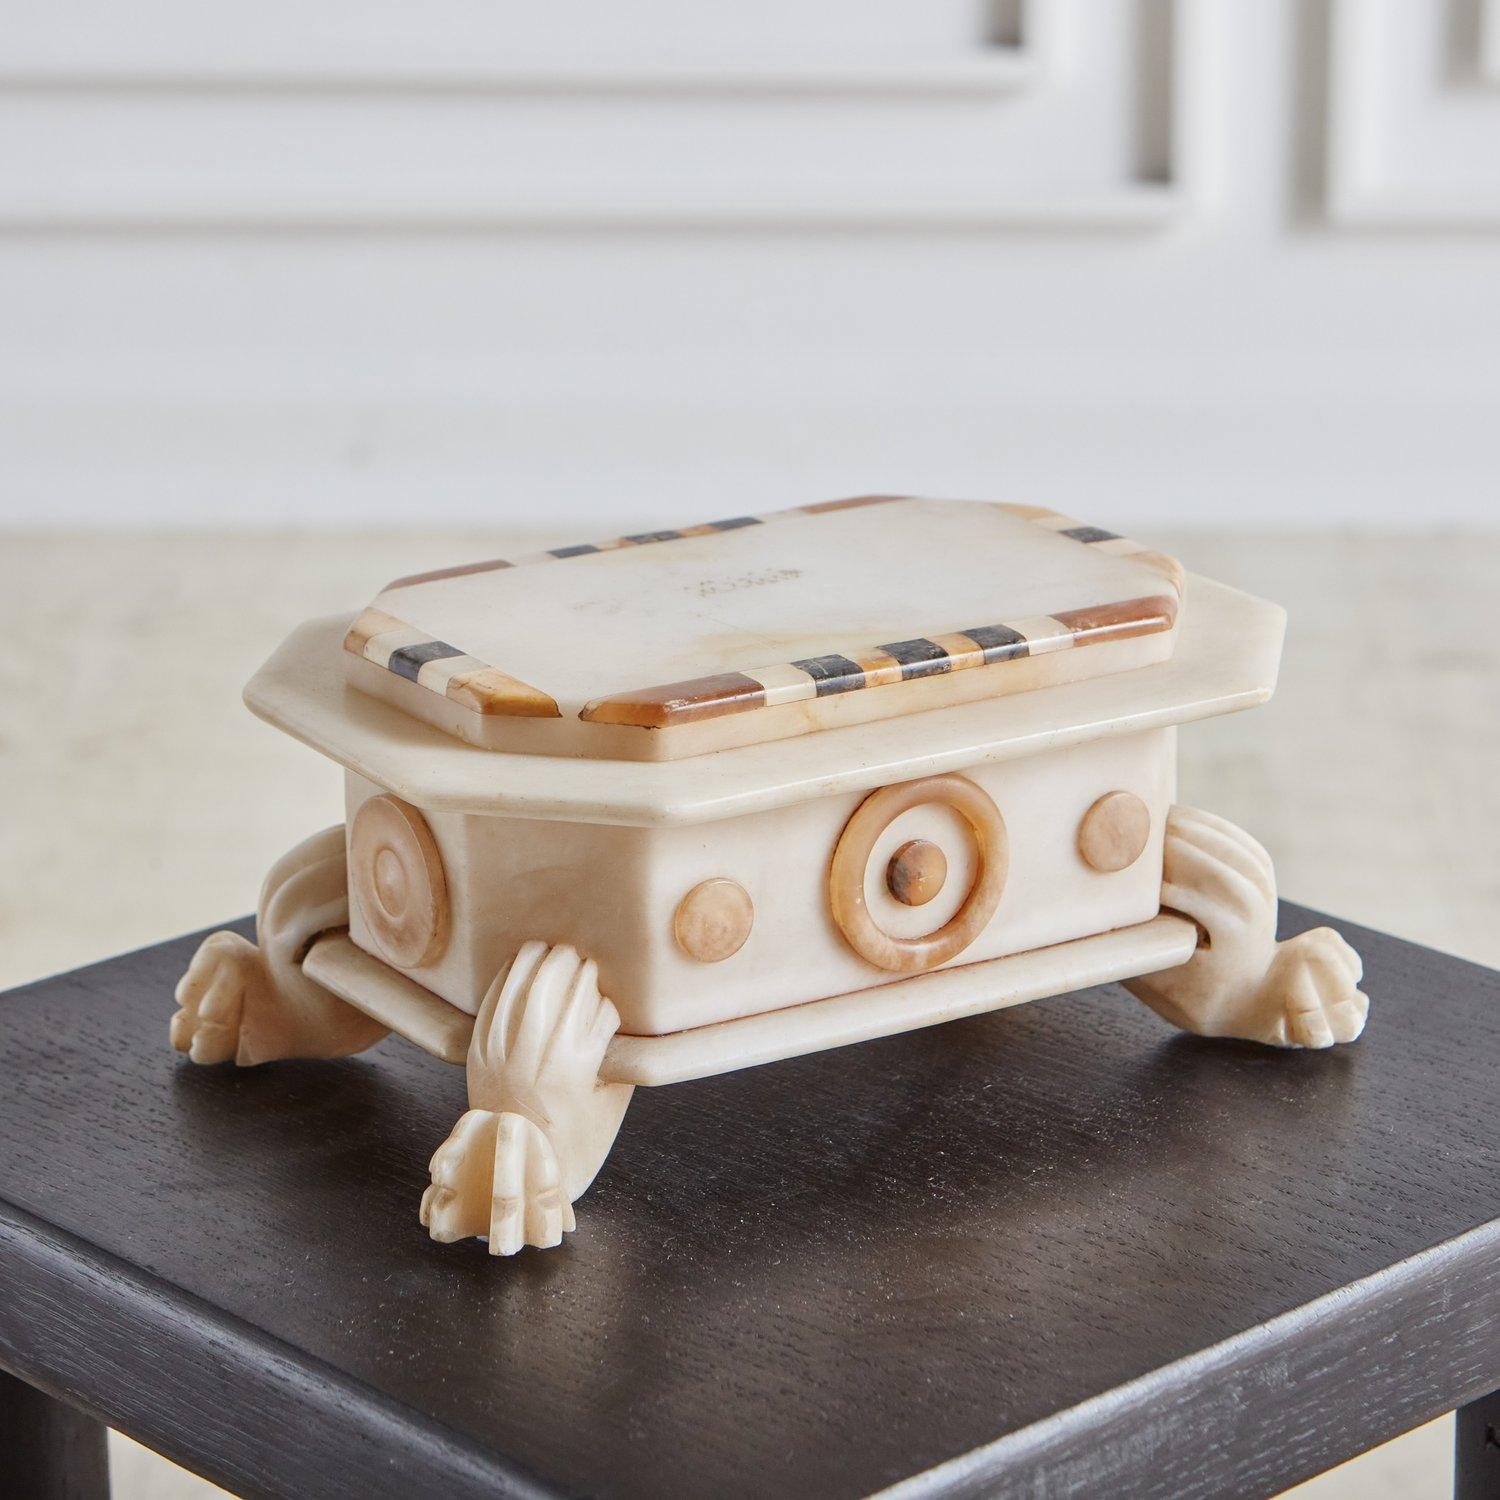 A gorgeous antique Italian box hand carved from a cream marble with textured claw feet and geometric details. This box has a lid with an inlaid marble trim in cognac and gray hues. Sourced in Italy.